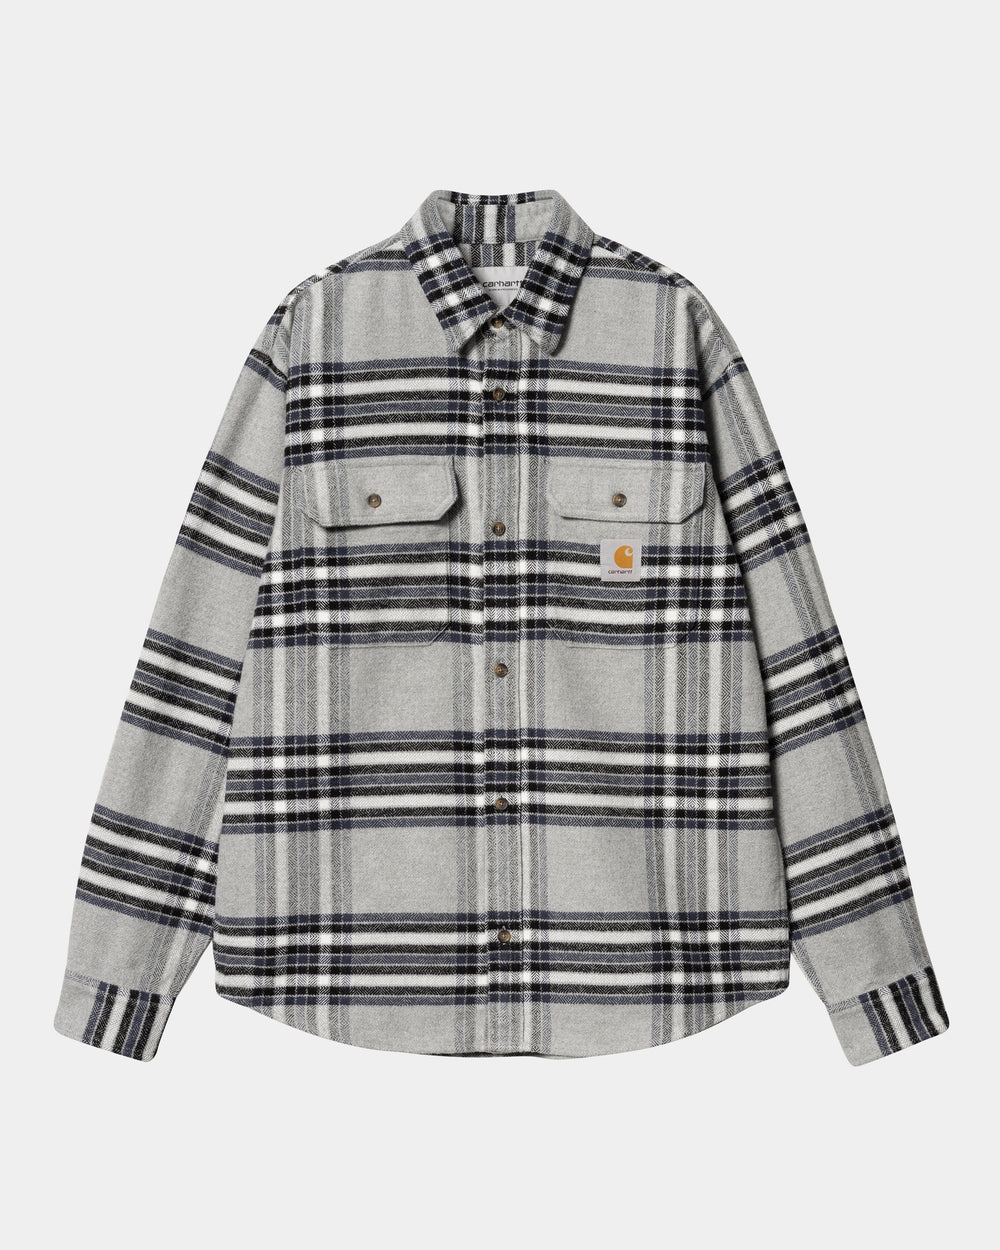 Carhartt WIP - CAHARTT WIP HAWKINS CHECK SHIRT IN GREY HEATHER / BLUE - Rent With Thred